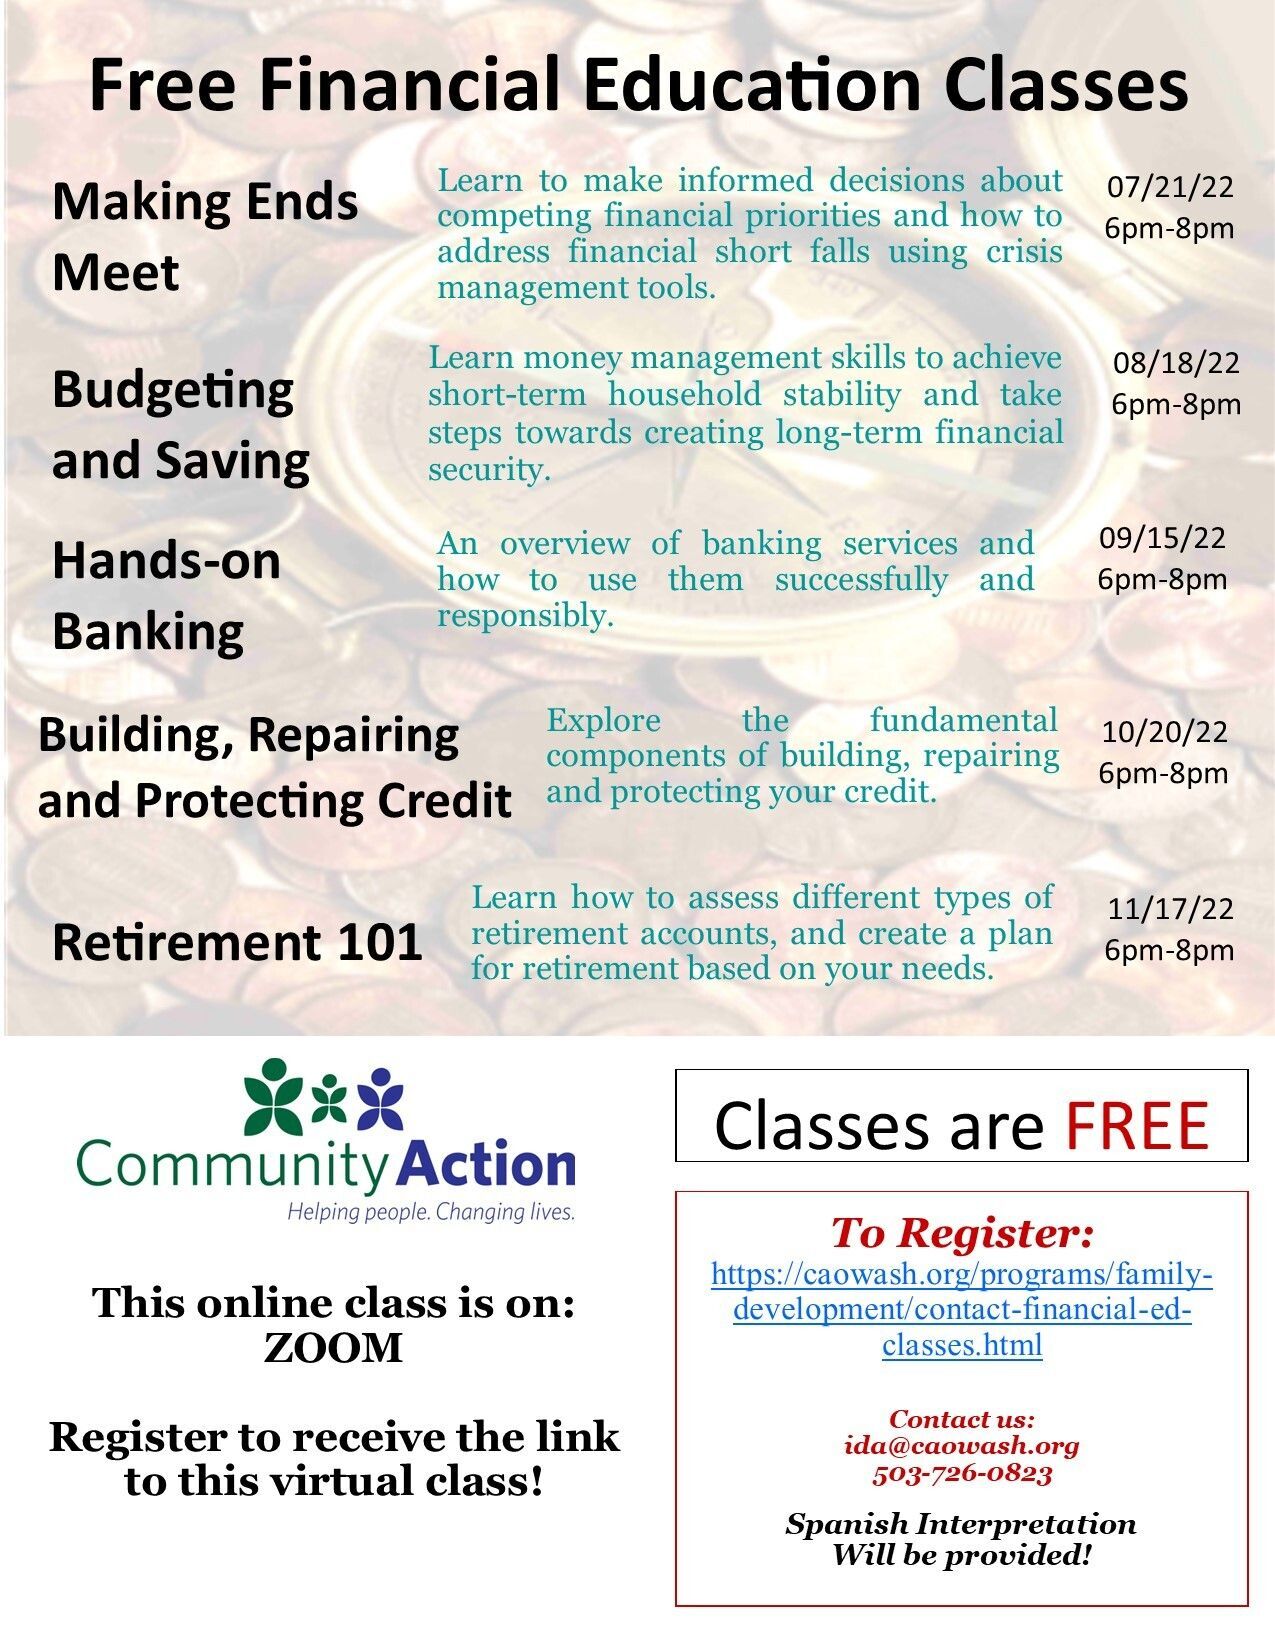 Schedule for the Financial Education Classes